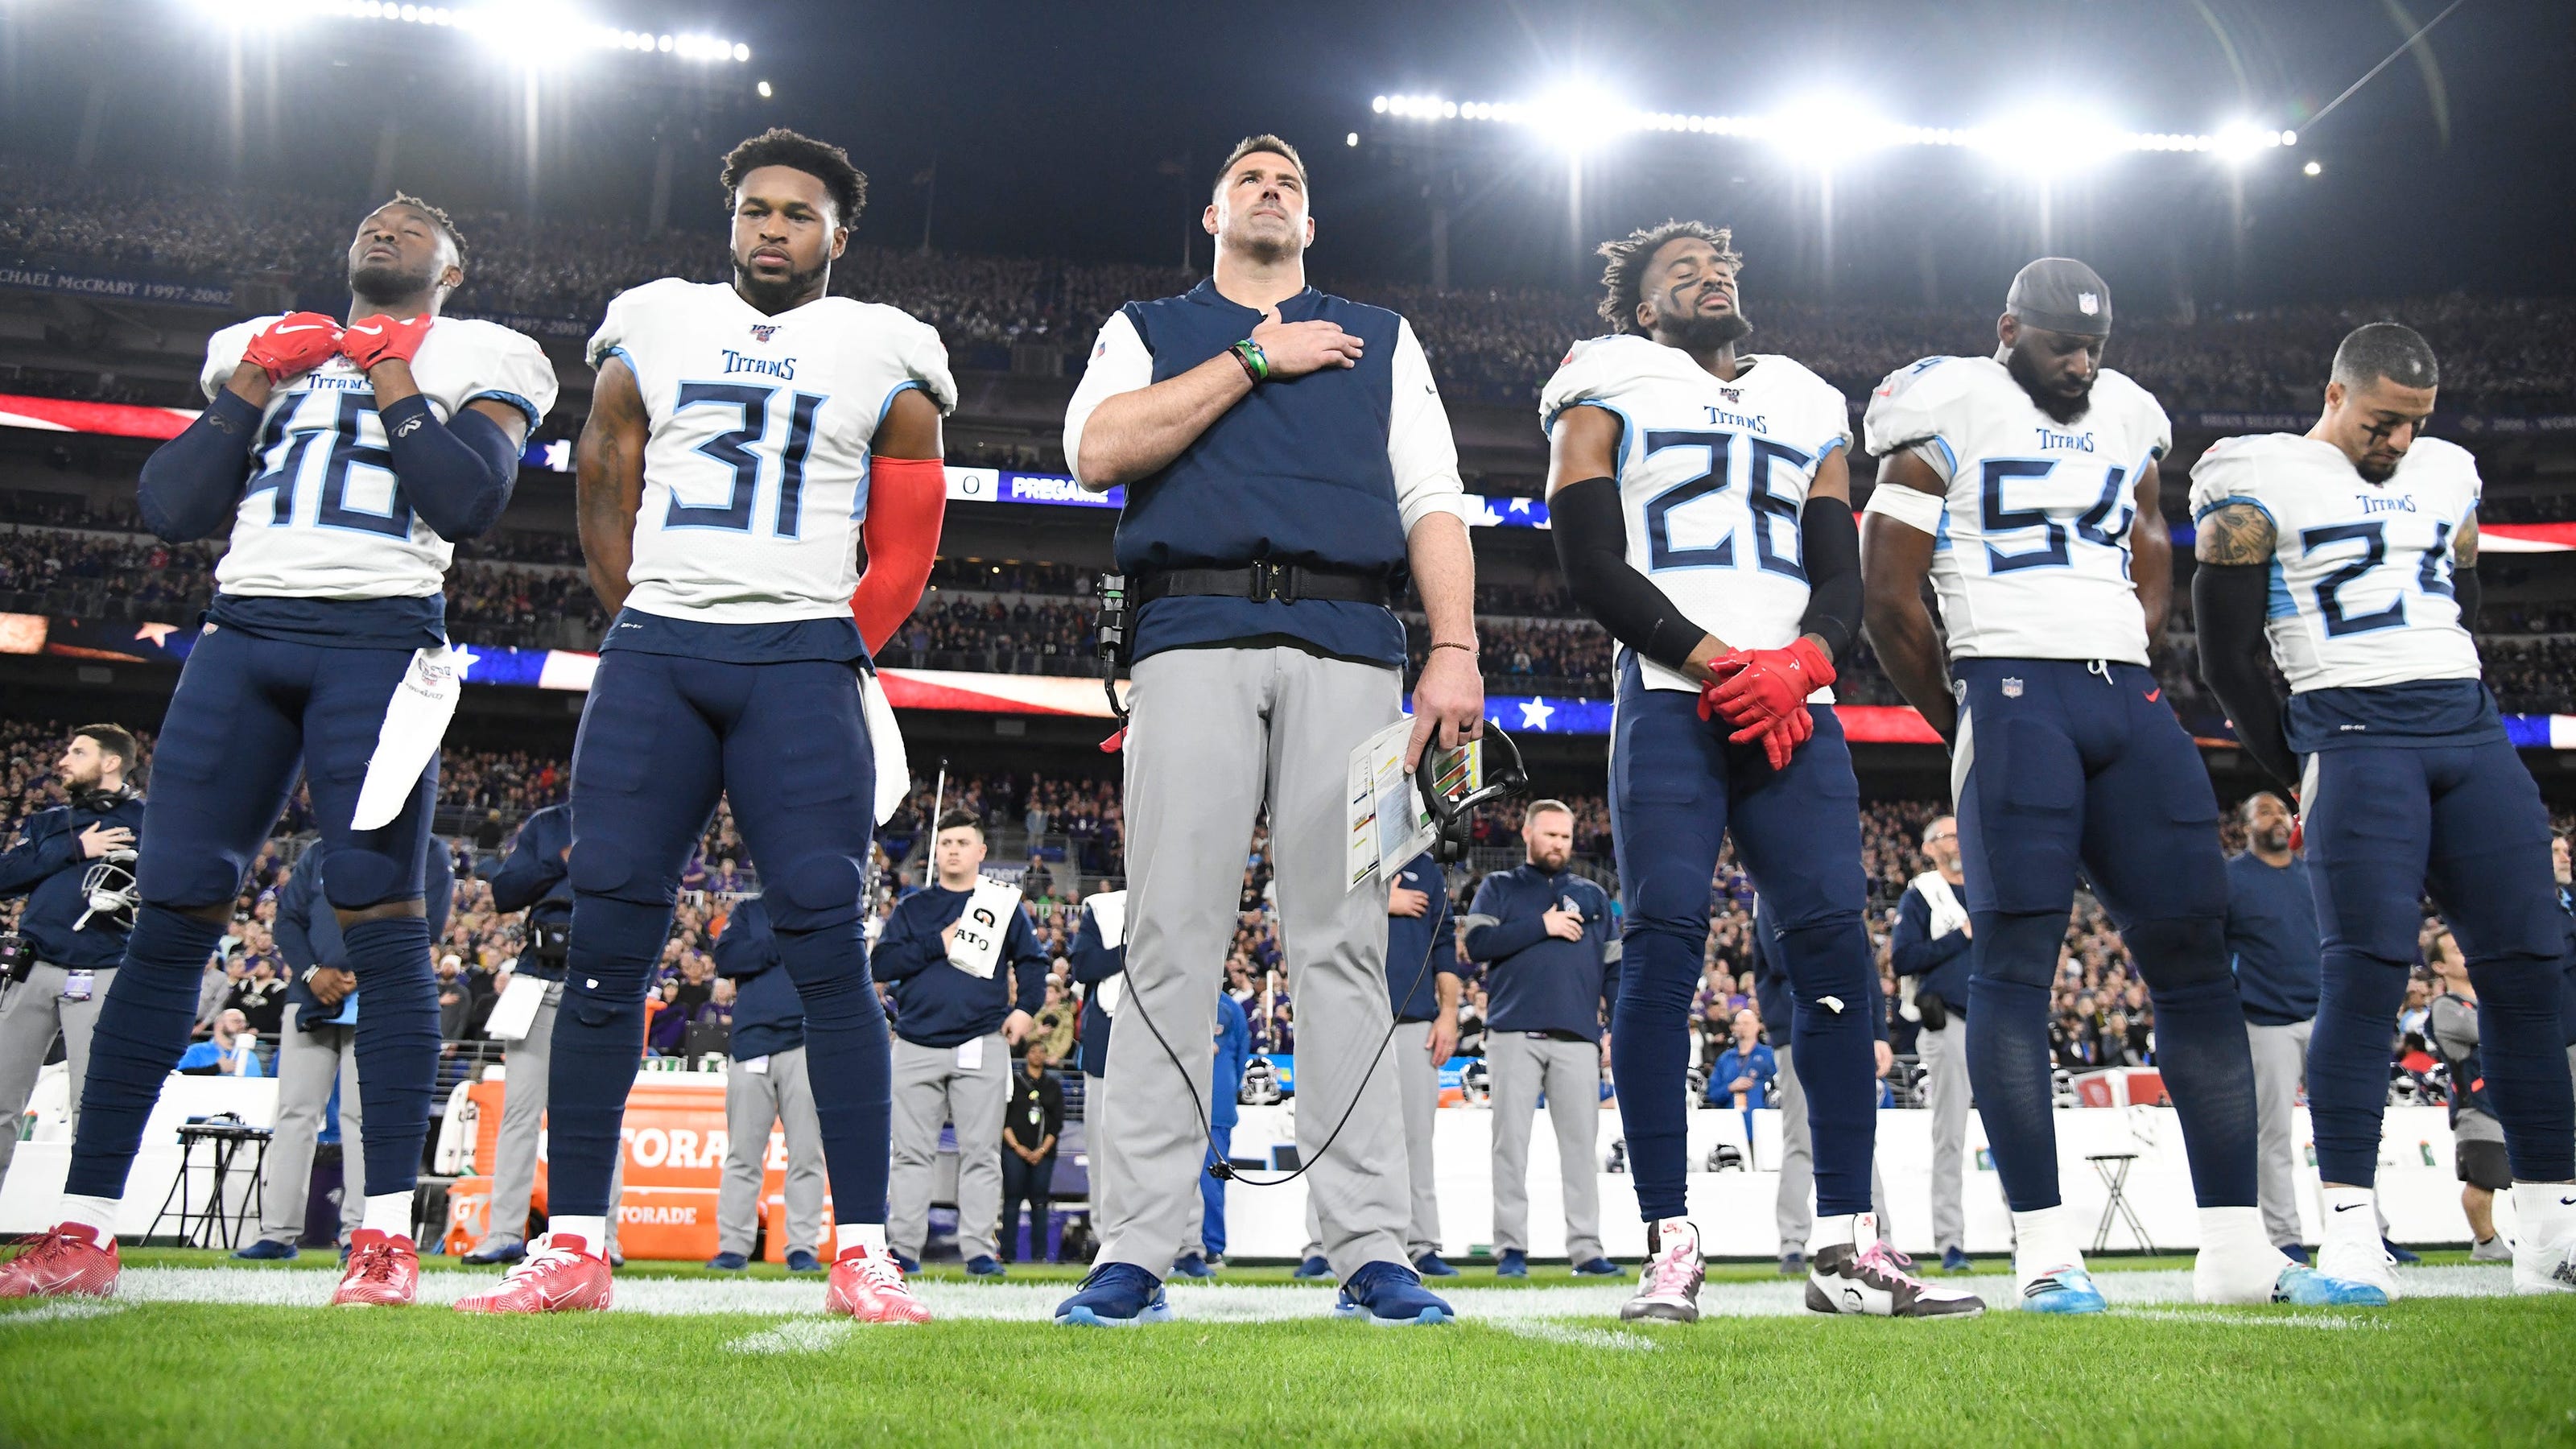 NFL plans Black national anthem 'Lift Every Voice and Sing' in Week 1